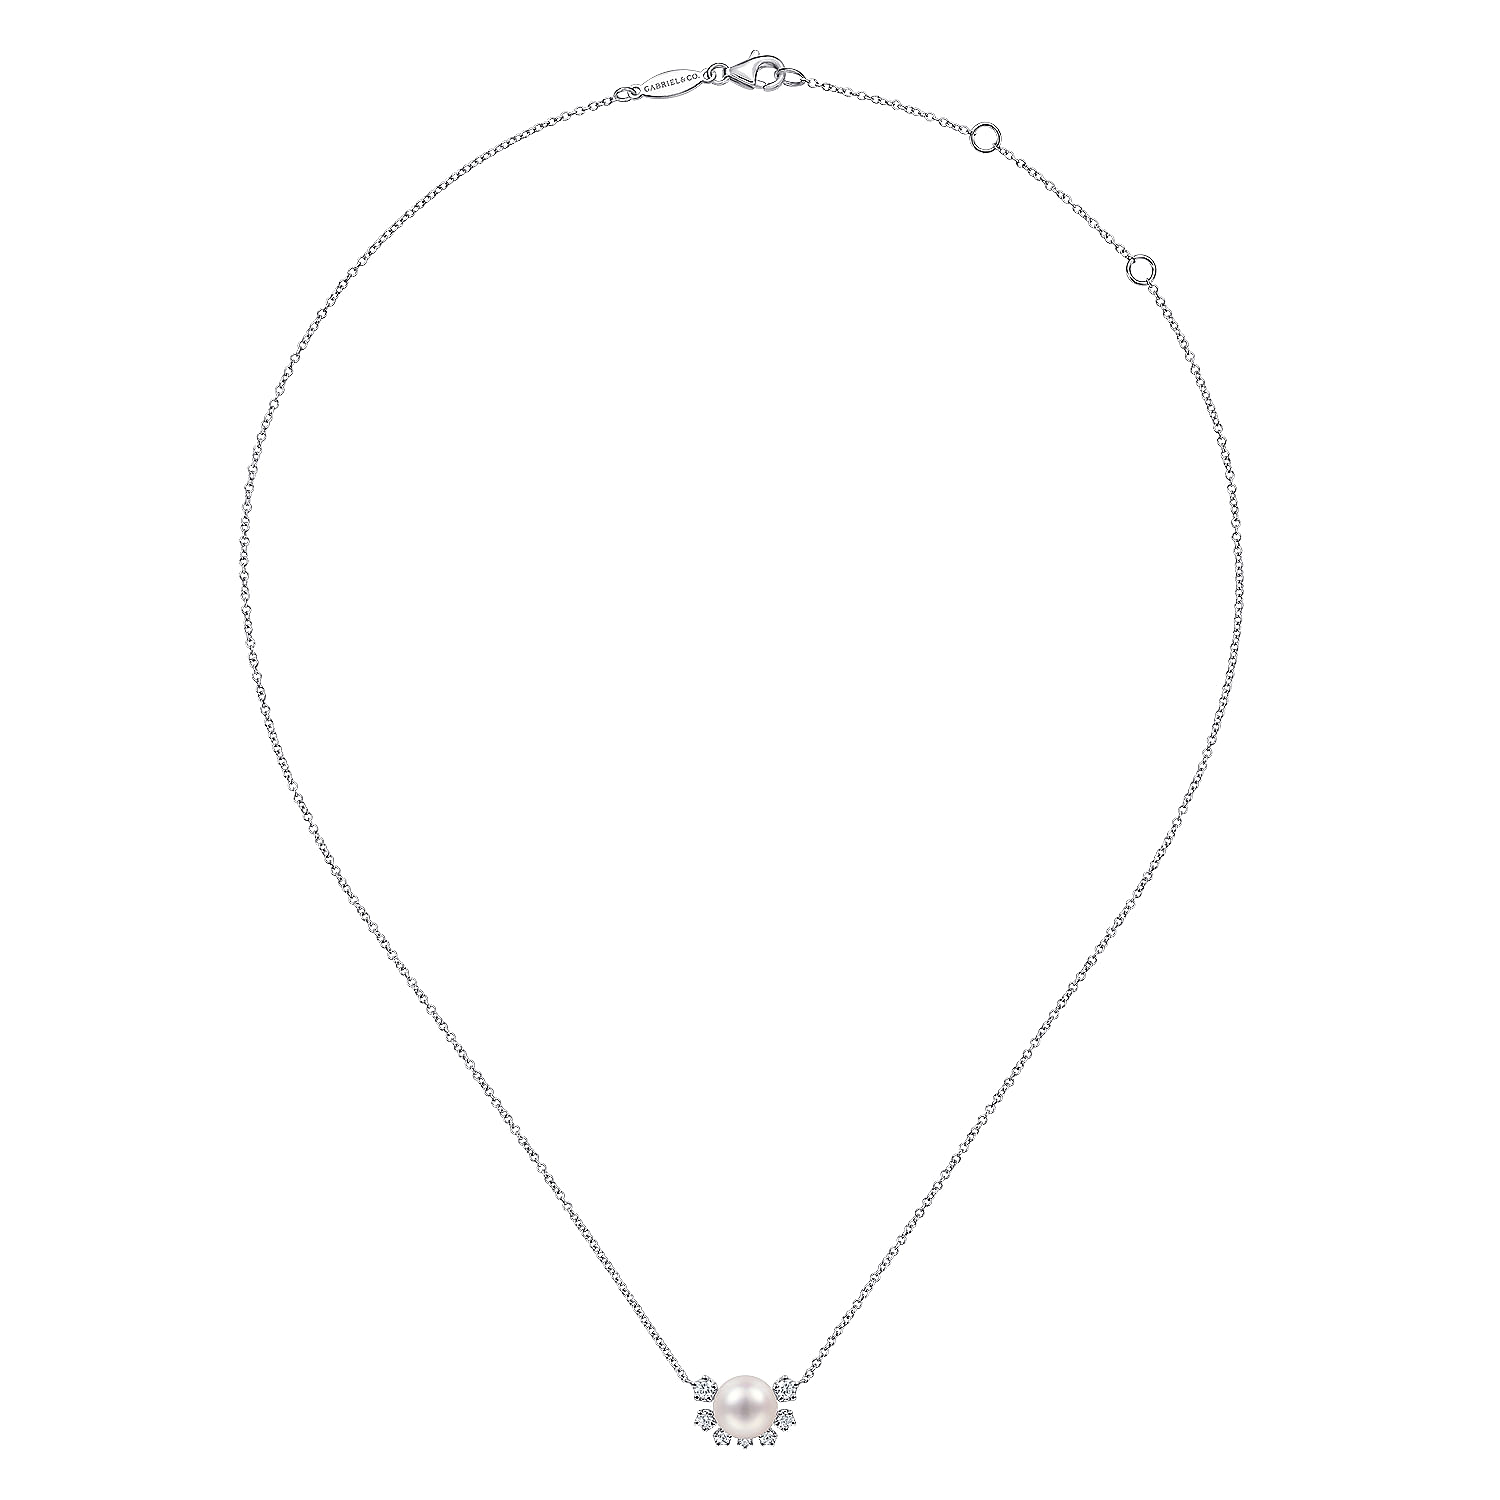 14K White Gold Round Pearl Pendant Necklace with Diamond Accents